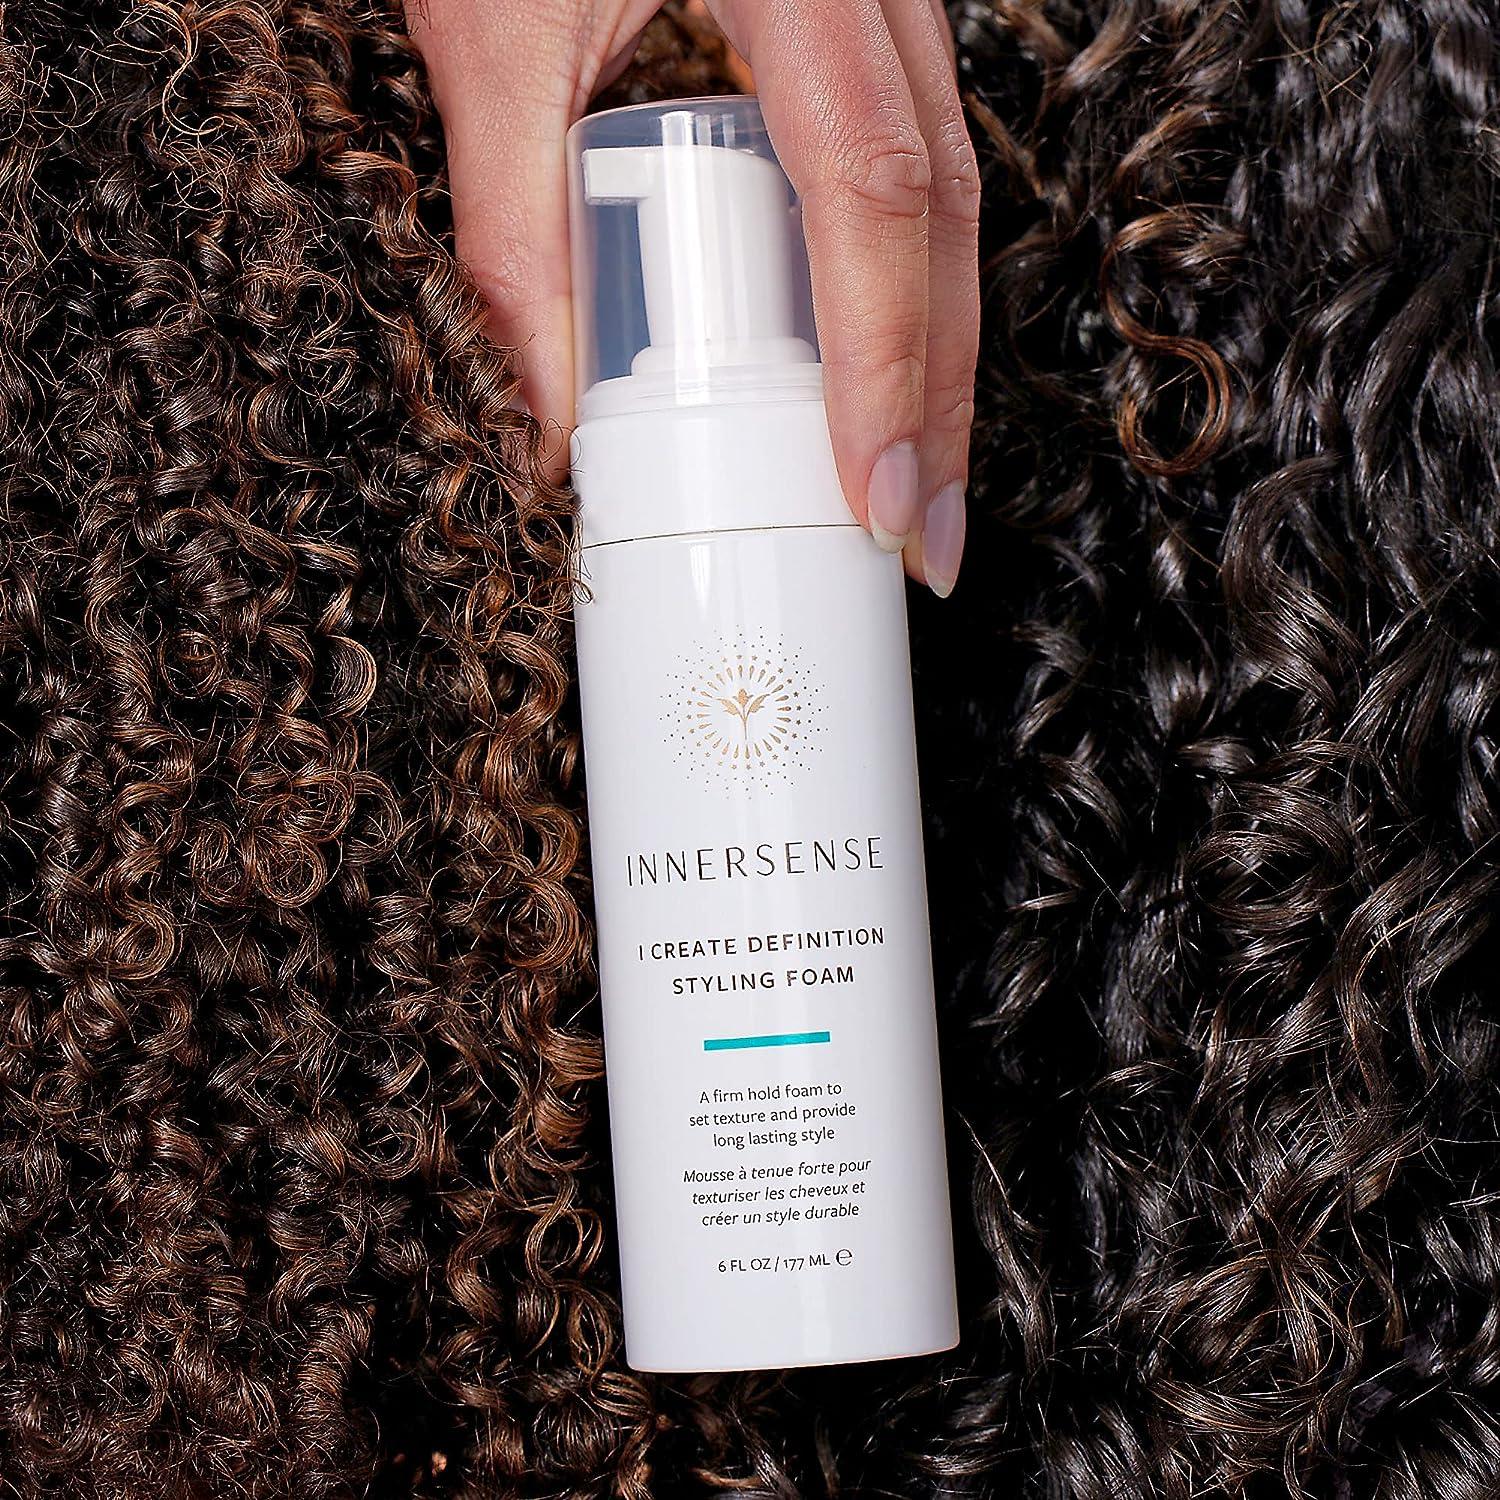 INNERSENSE Organic Beauty - Natural I Create Definition Styling Foam, Clean Haircare For Long-Lasting Curls (6 fl oz